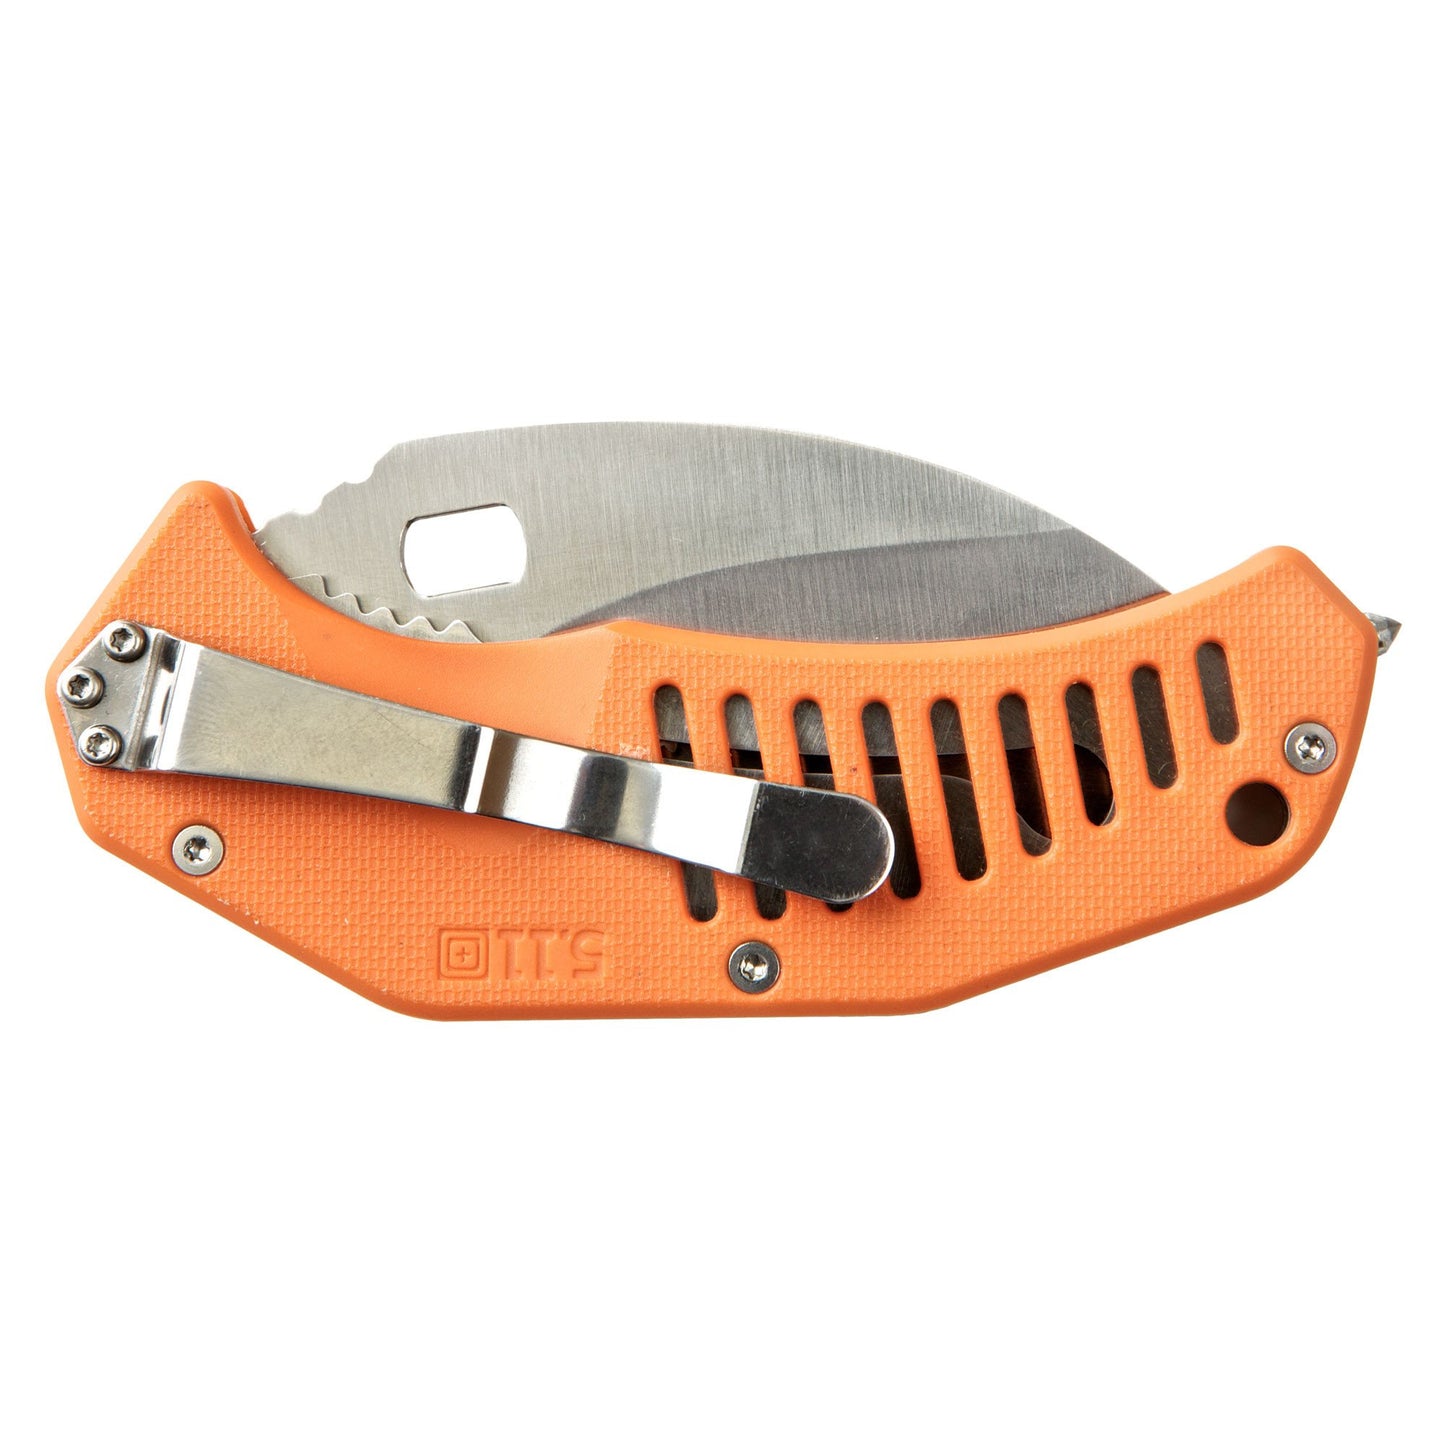 51086 - LMC Curved Rescue BLD Knife